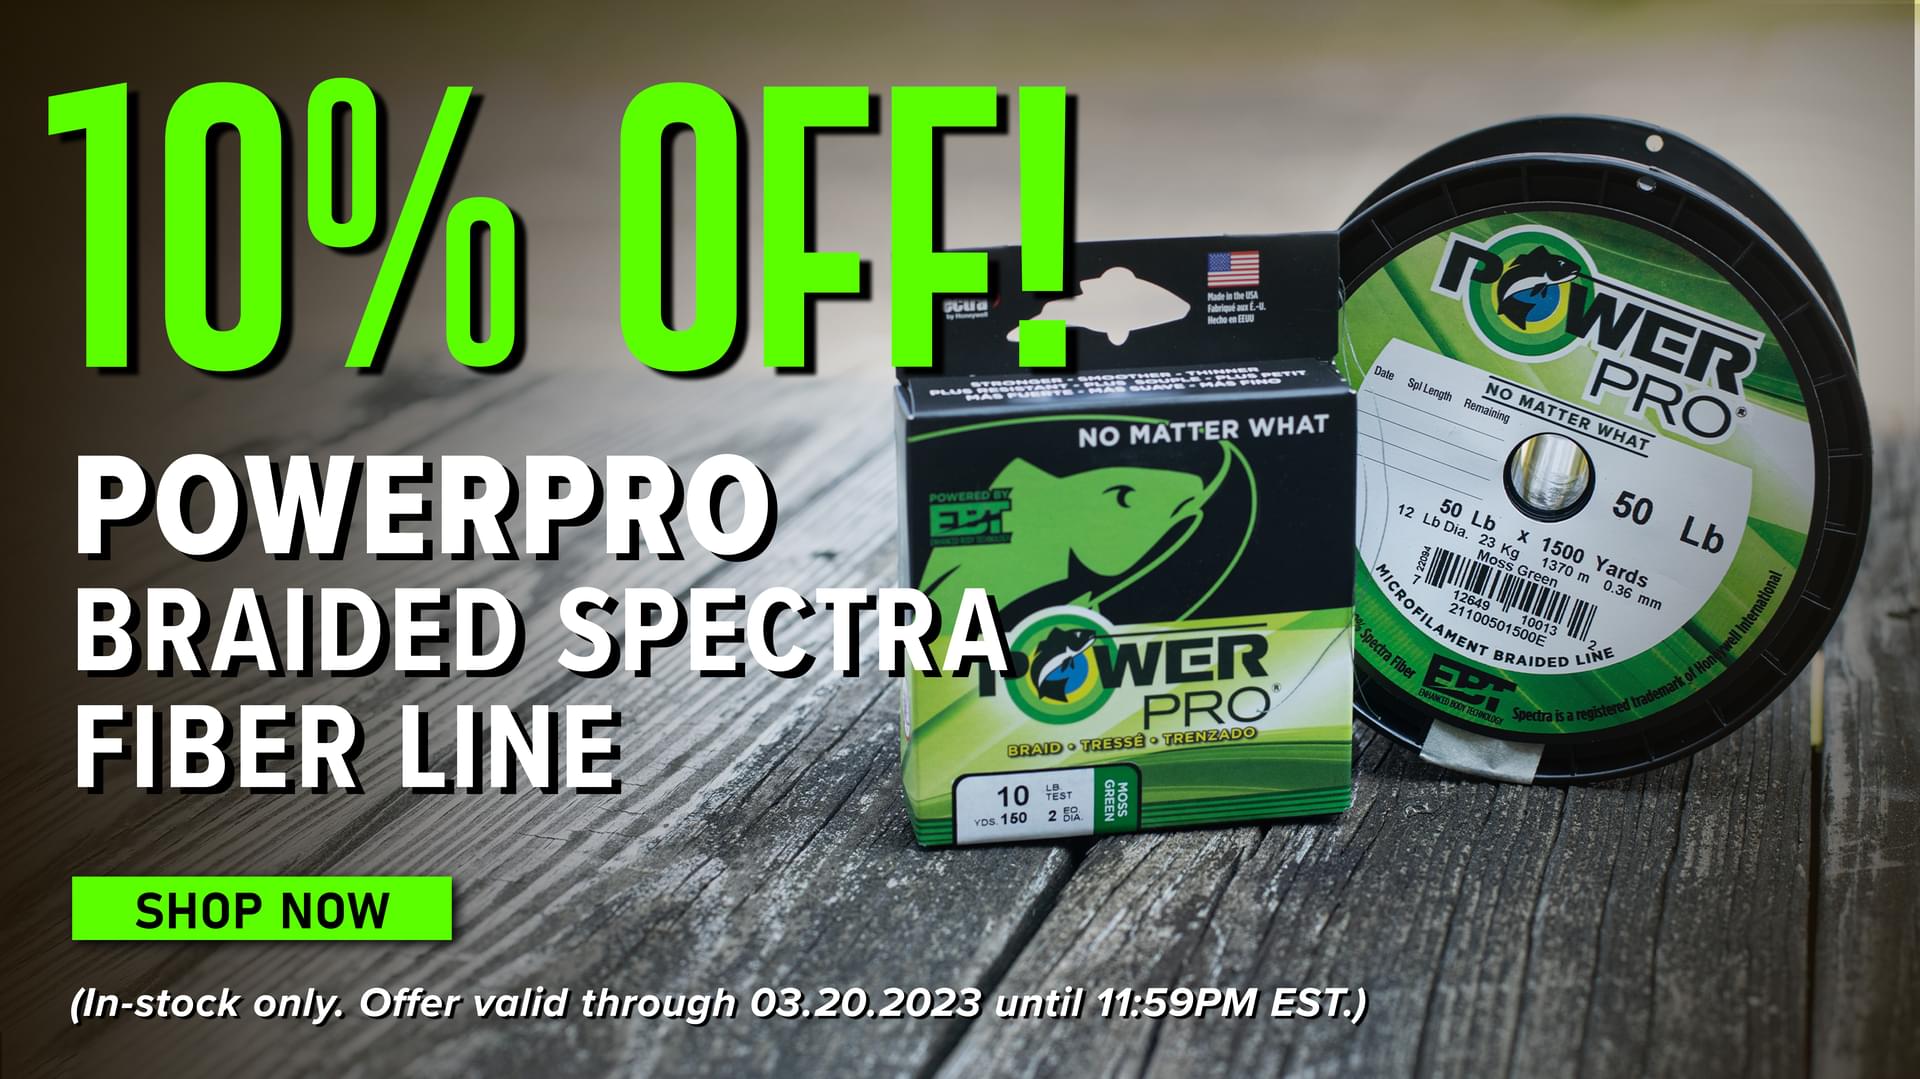 10% Off! Powerpro Braided Spectra Fiber Line Shop Now (In-stock only. Offer valid through 03.20.2023 until 11:59PM EST.)  C i, R RA'DED Ty resT 2 5ia 160 YDS 